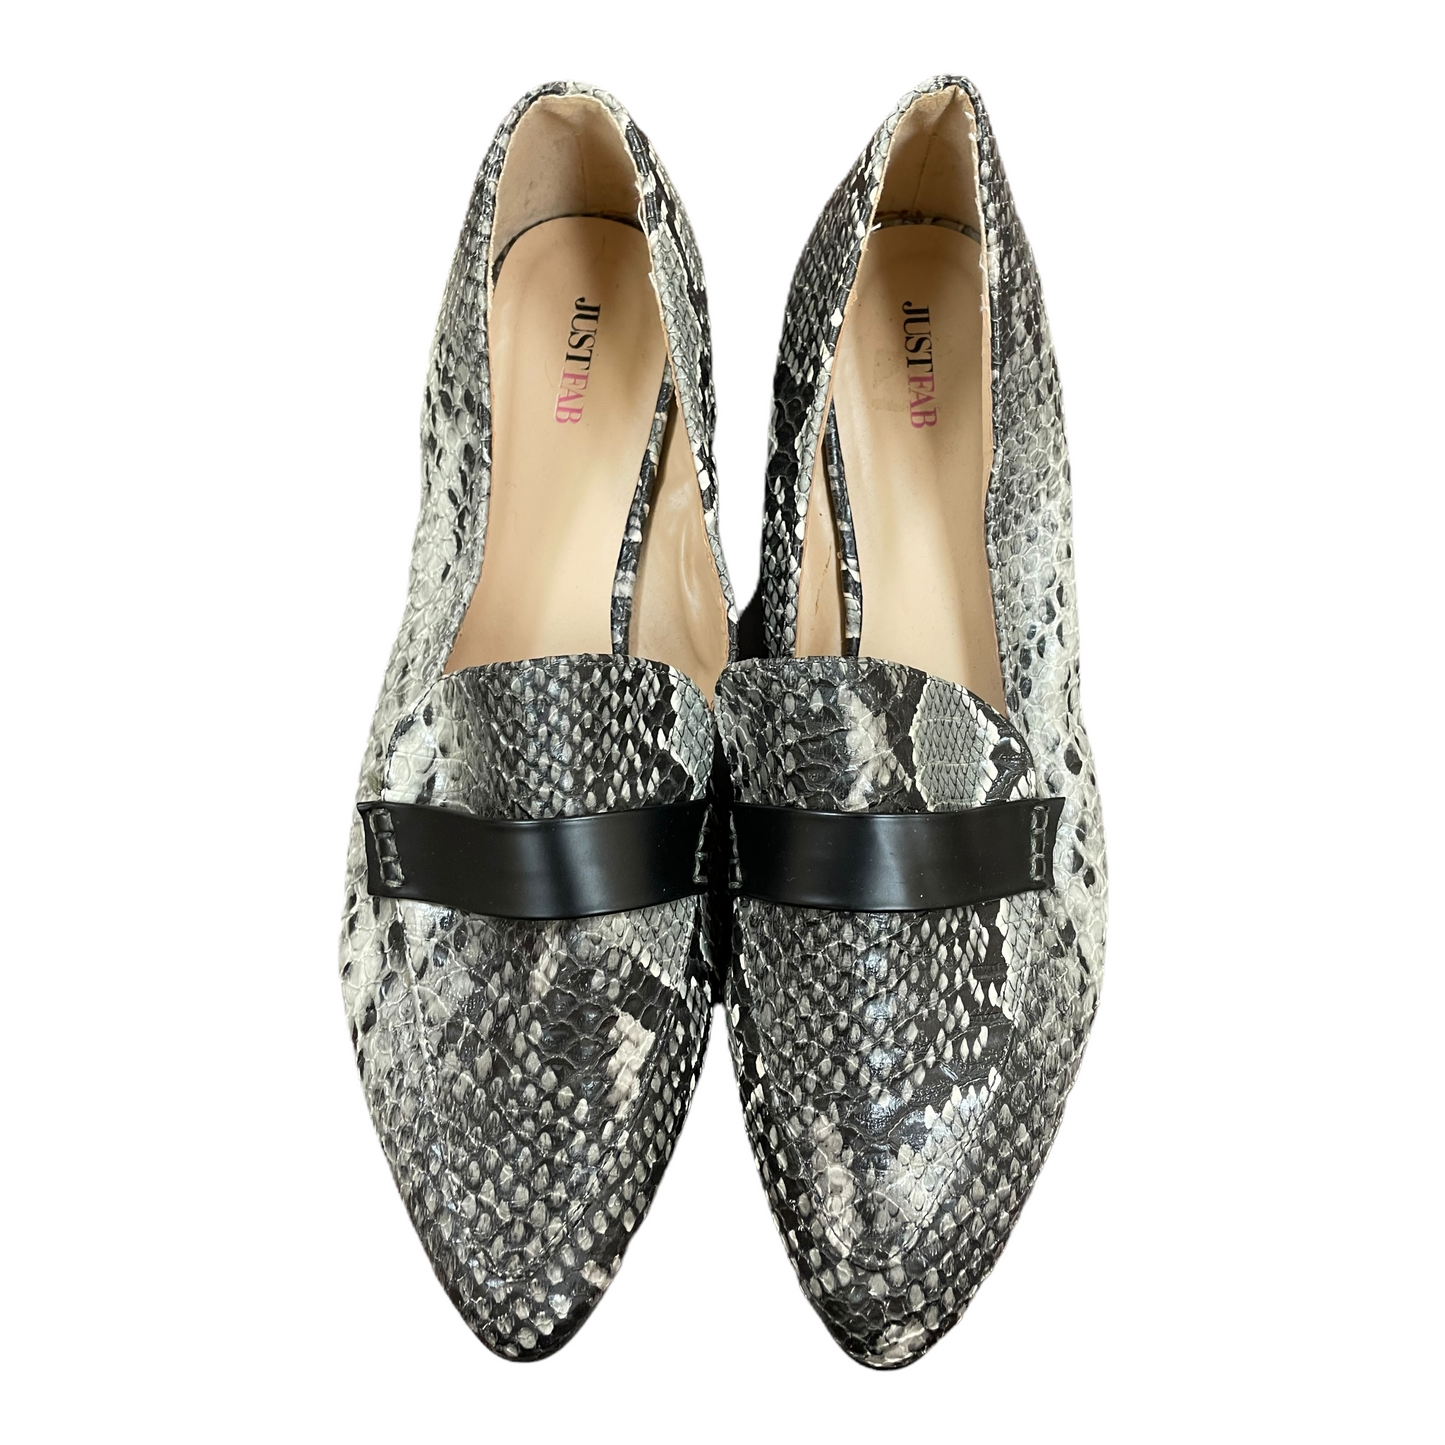 Snakeskin Print Shoes Flats By Just Fab, Size: 11